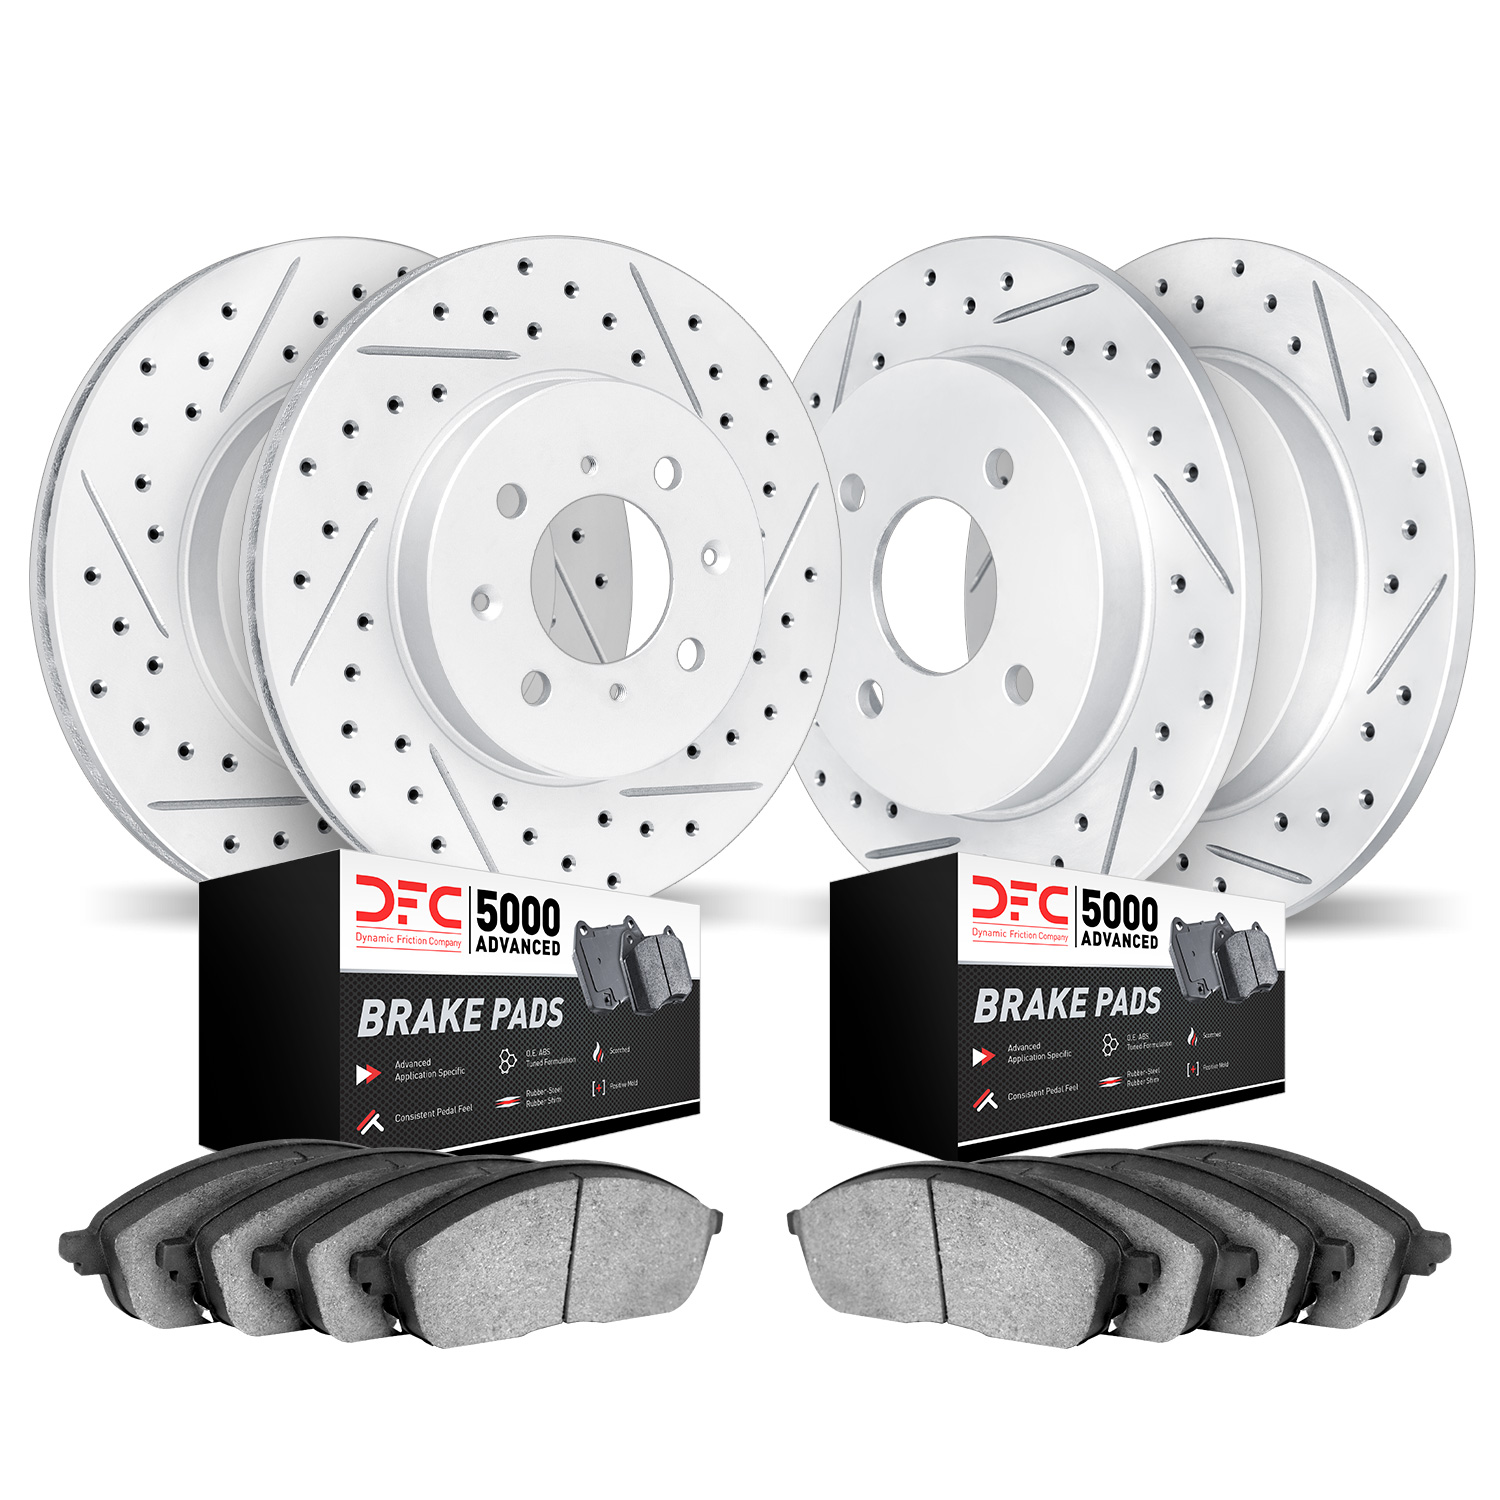 2504-54191 Geoperformance Drilled/Slotted Rotors w/5000 Advanced Brake Pads Kit, 1992-1995 Ford/Lincoln/Mercury/Mazda, Position: